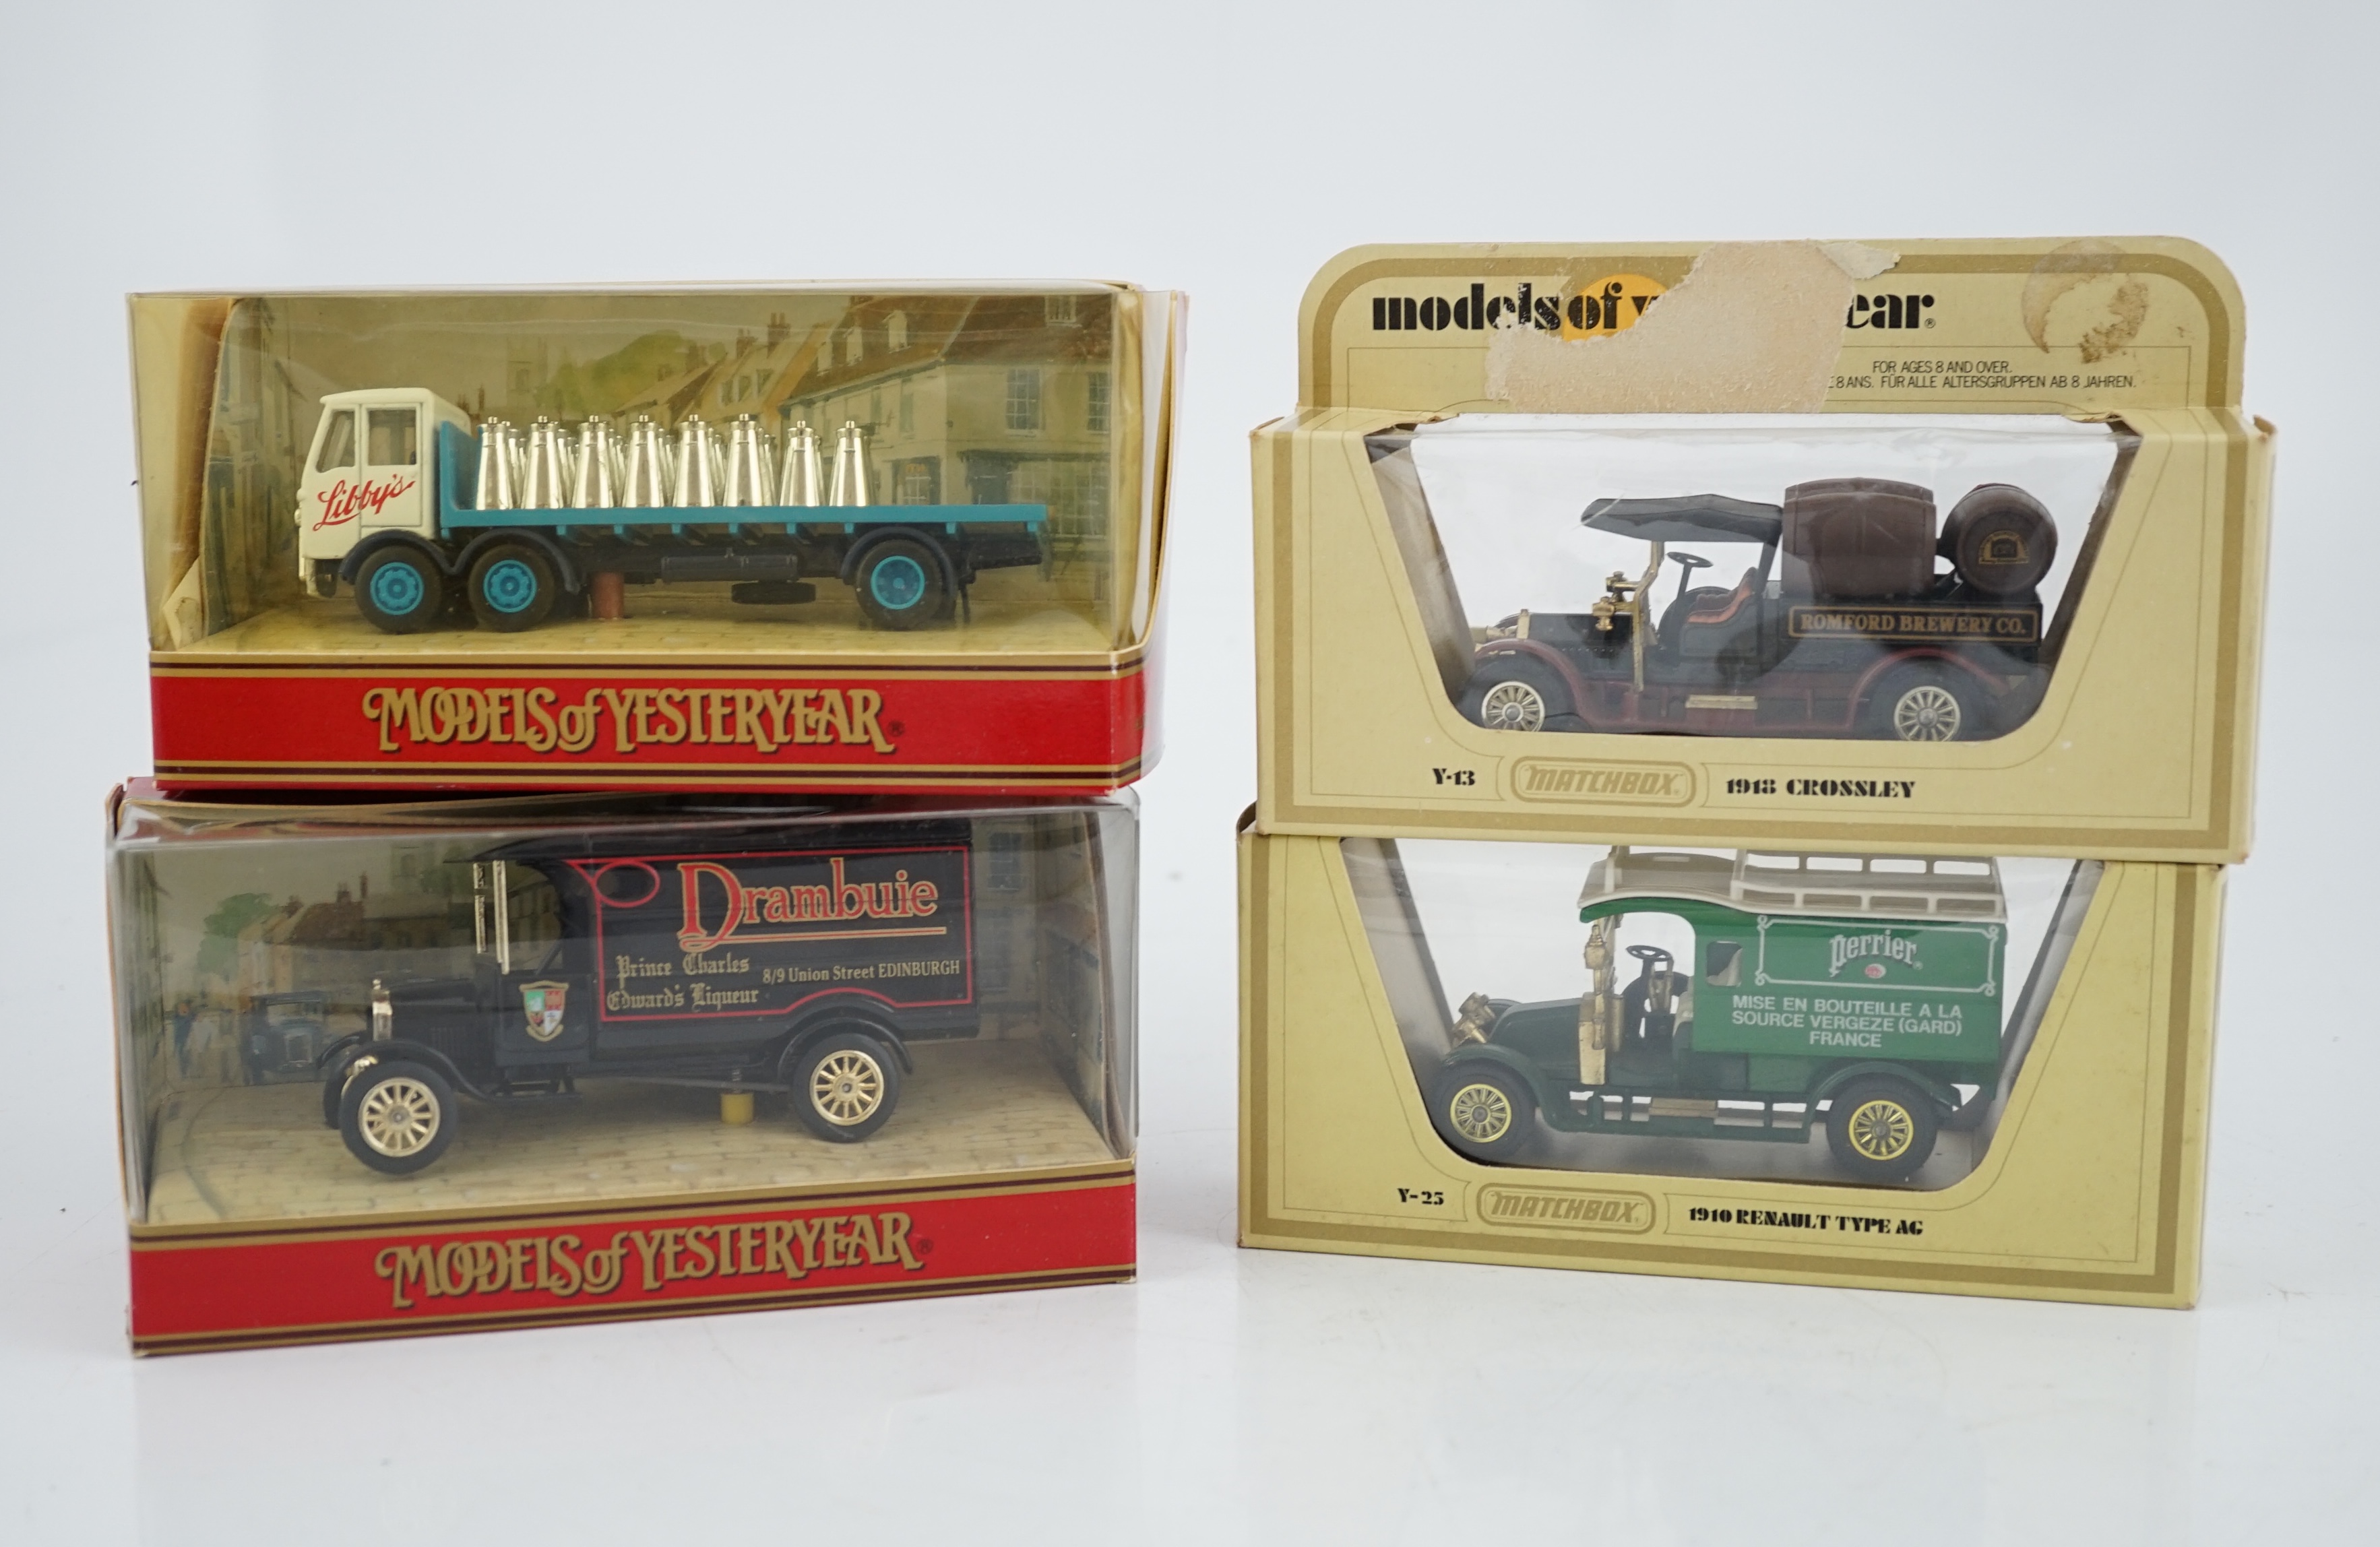 Sixty-six Matchbox Models of Yesteryear, in cream or maroon era boxes, including cars, commercial vehicles, fire engines, a Stephenson’s Rocket, etc.